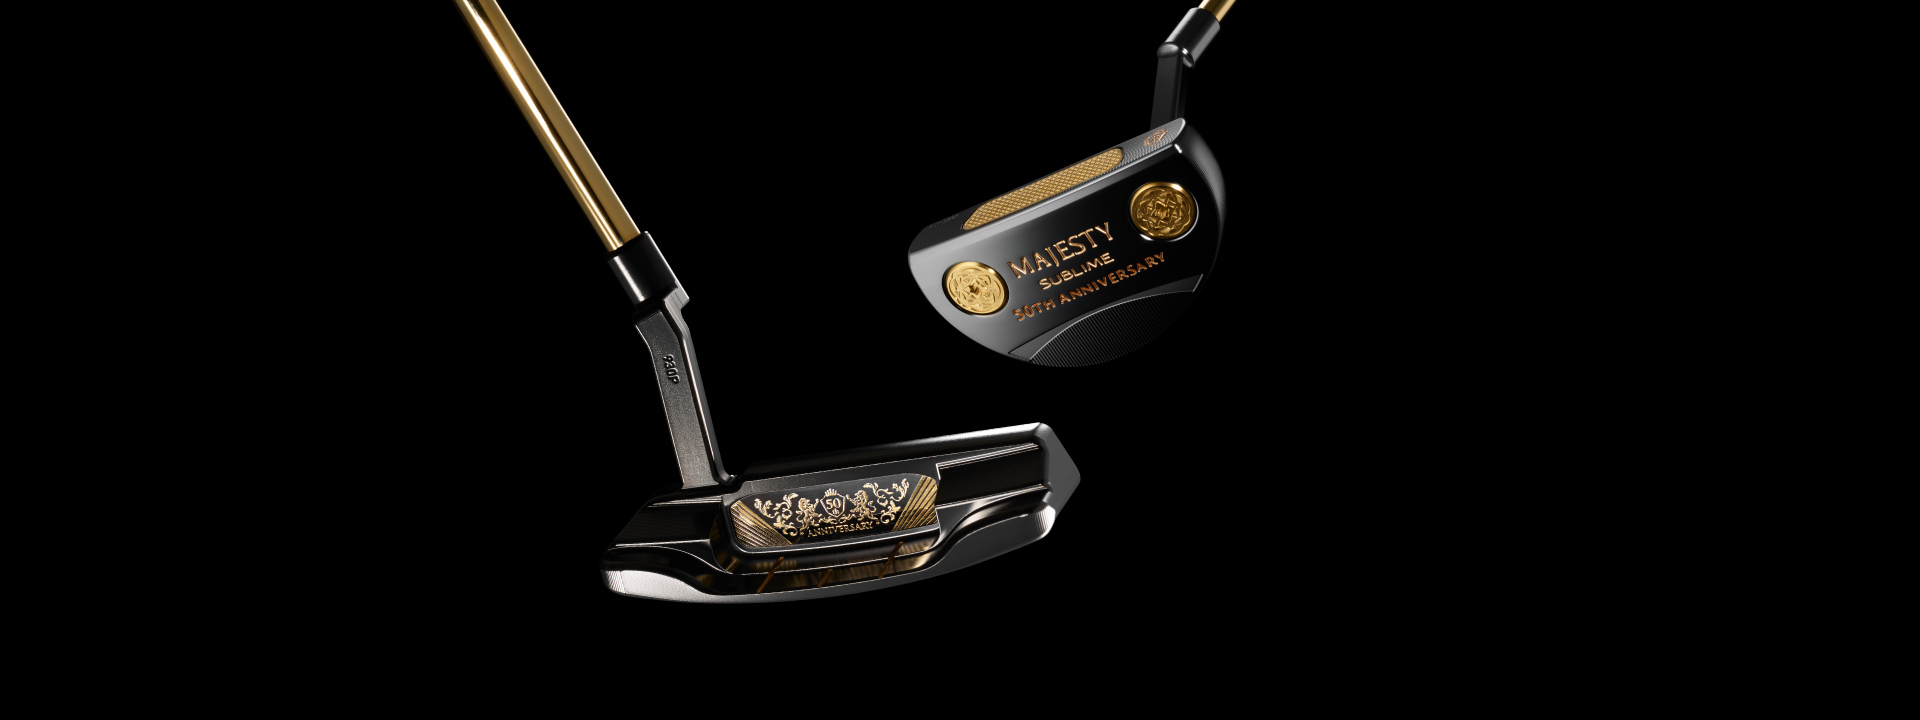 MAJESTY SUBLIME 50th ANNIVERSARY PUTTER | Majesty